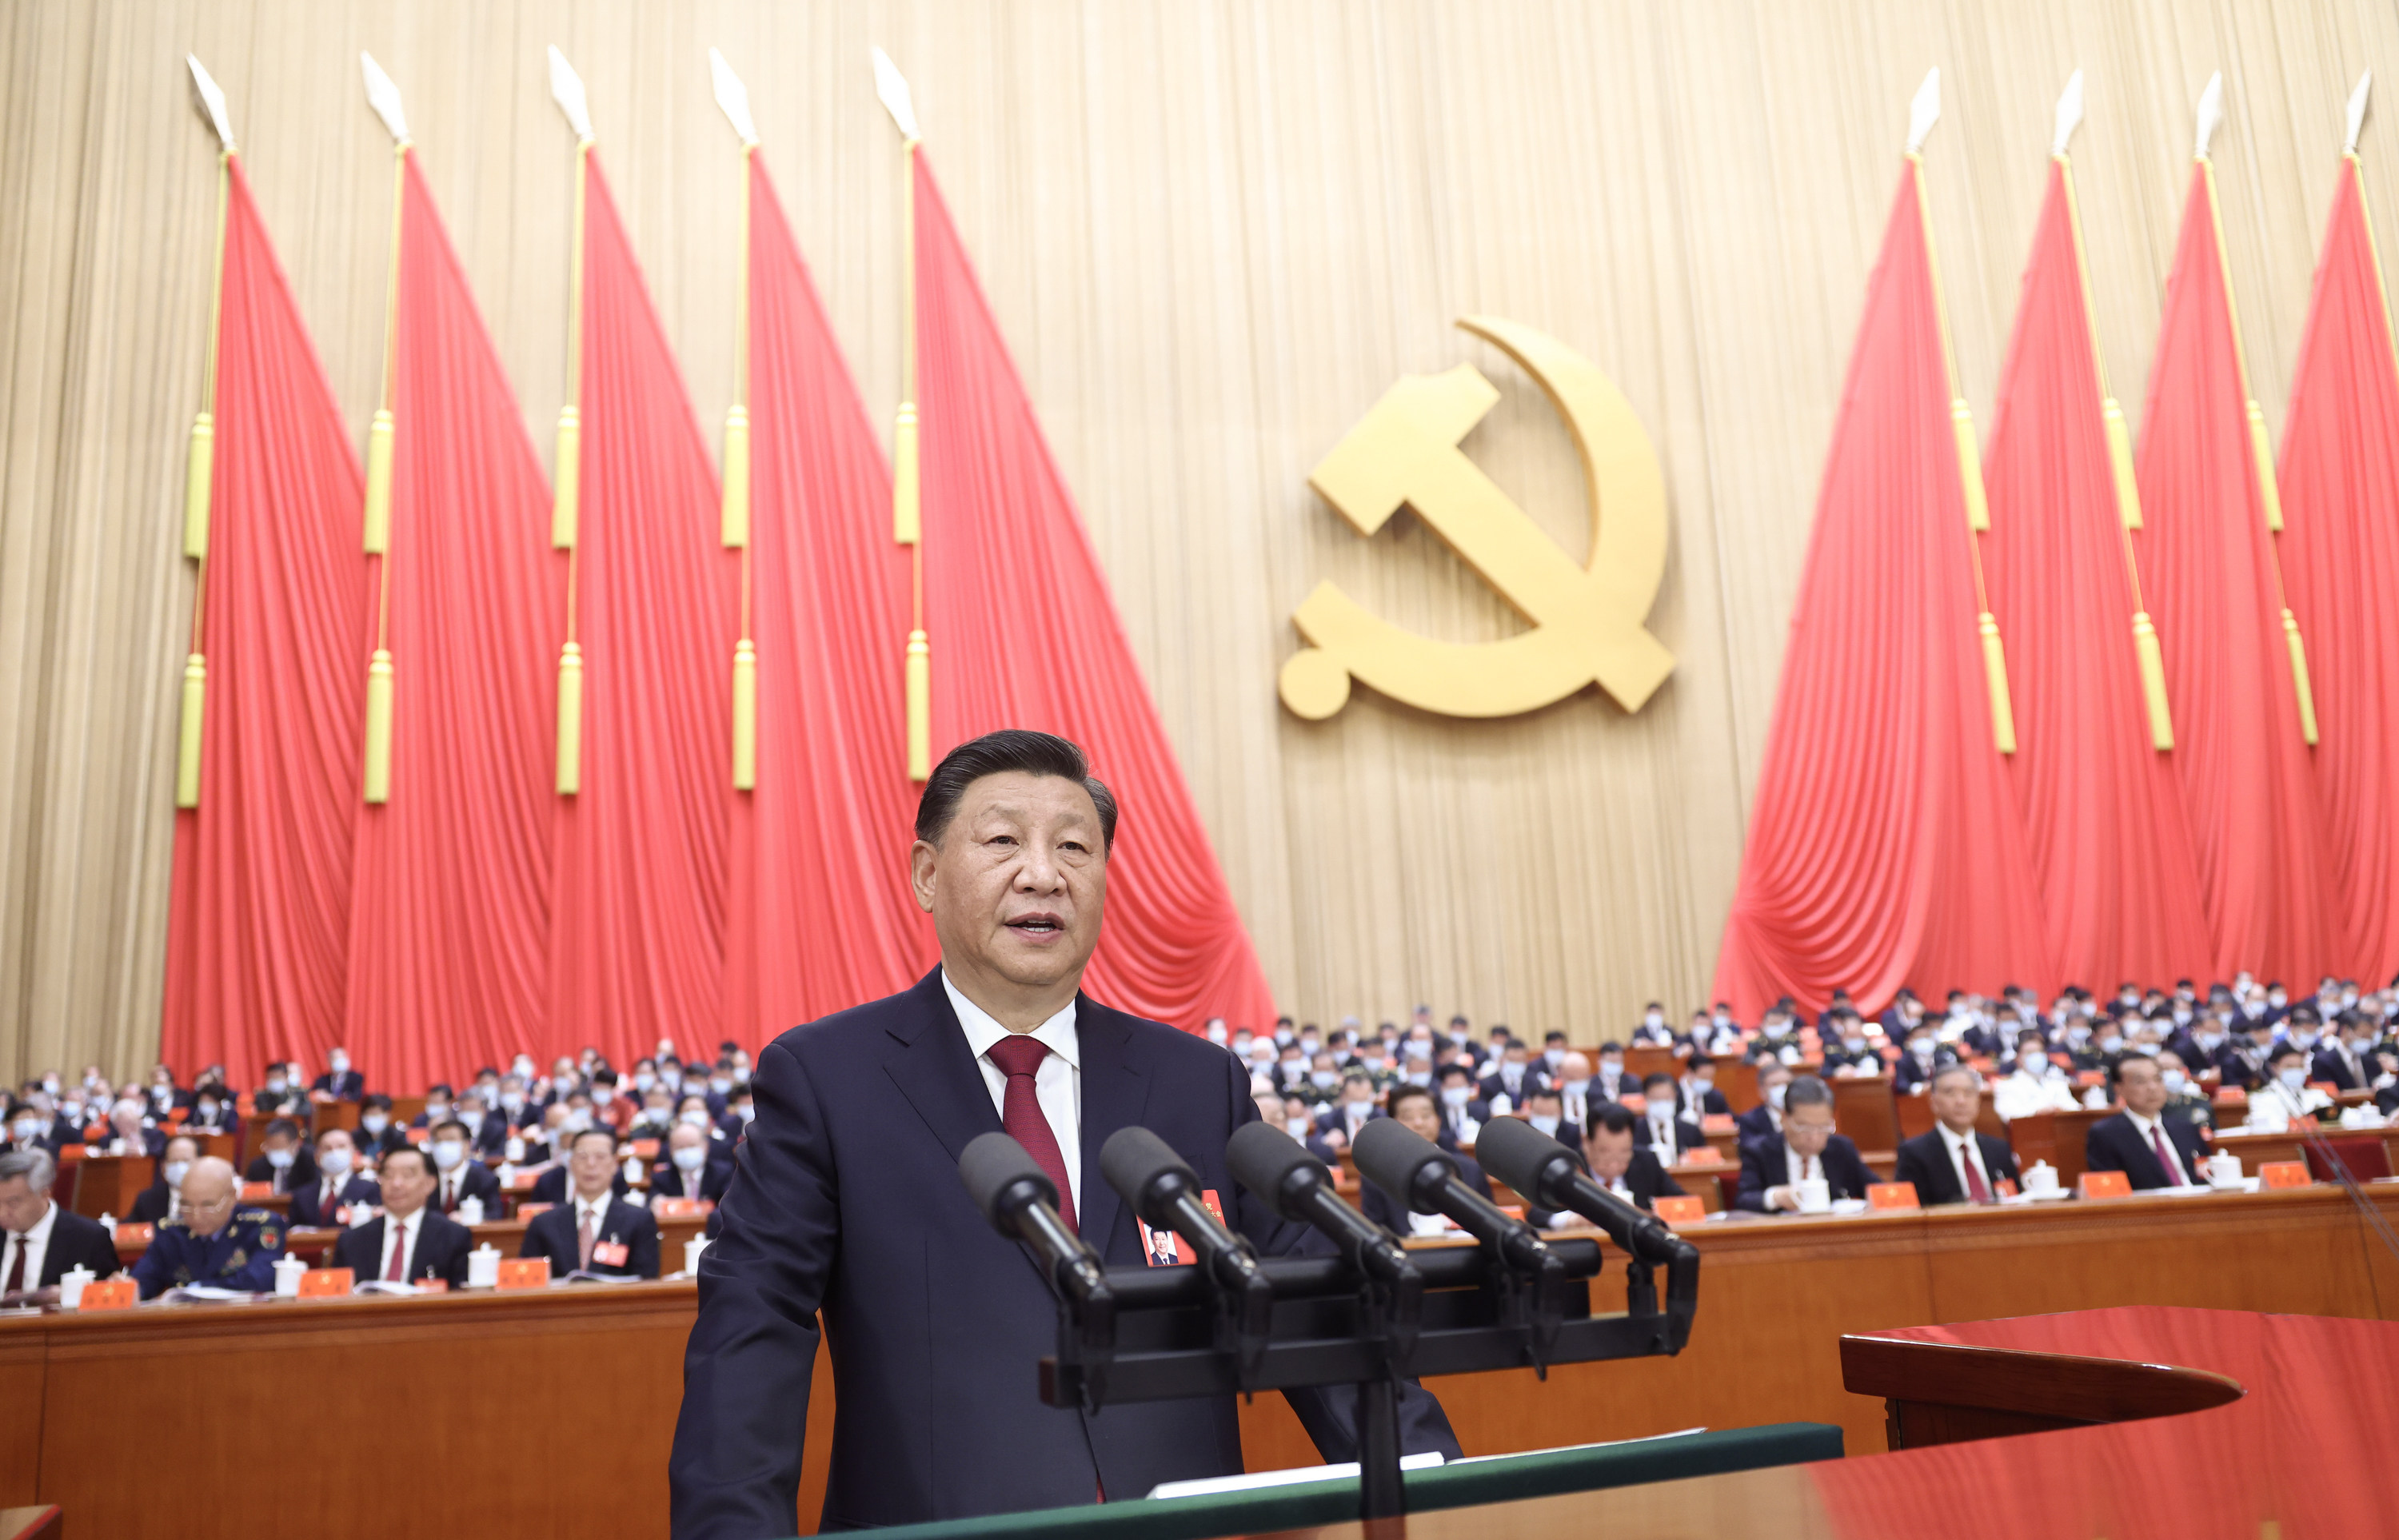 Xi Jinping delivers a report to the 20th party congress at the Great Hall of the People in Beijing on October 16. A key element of China’s economic success is adherence to party leadership. Photo: Xinhua